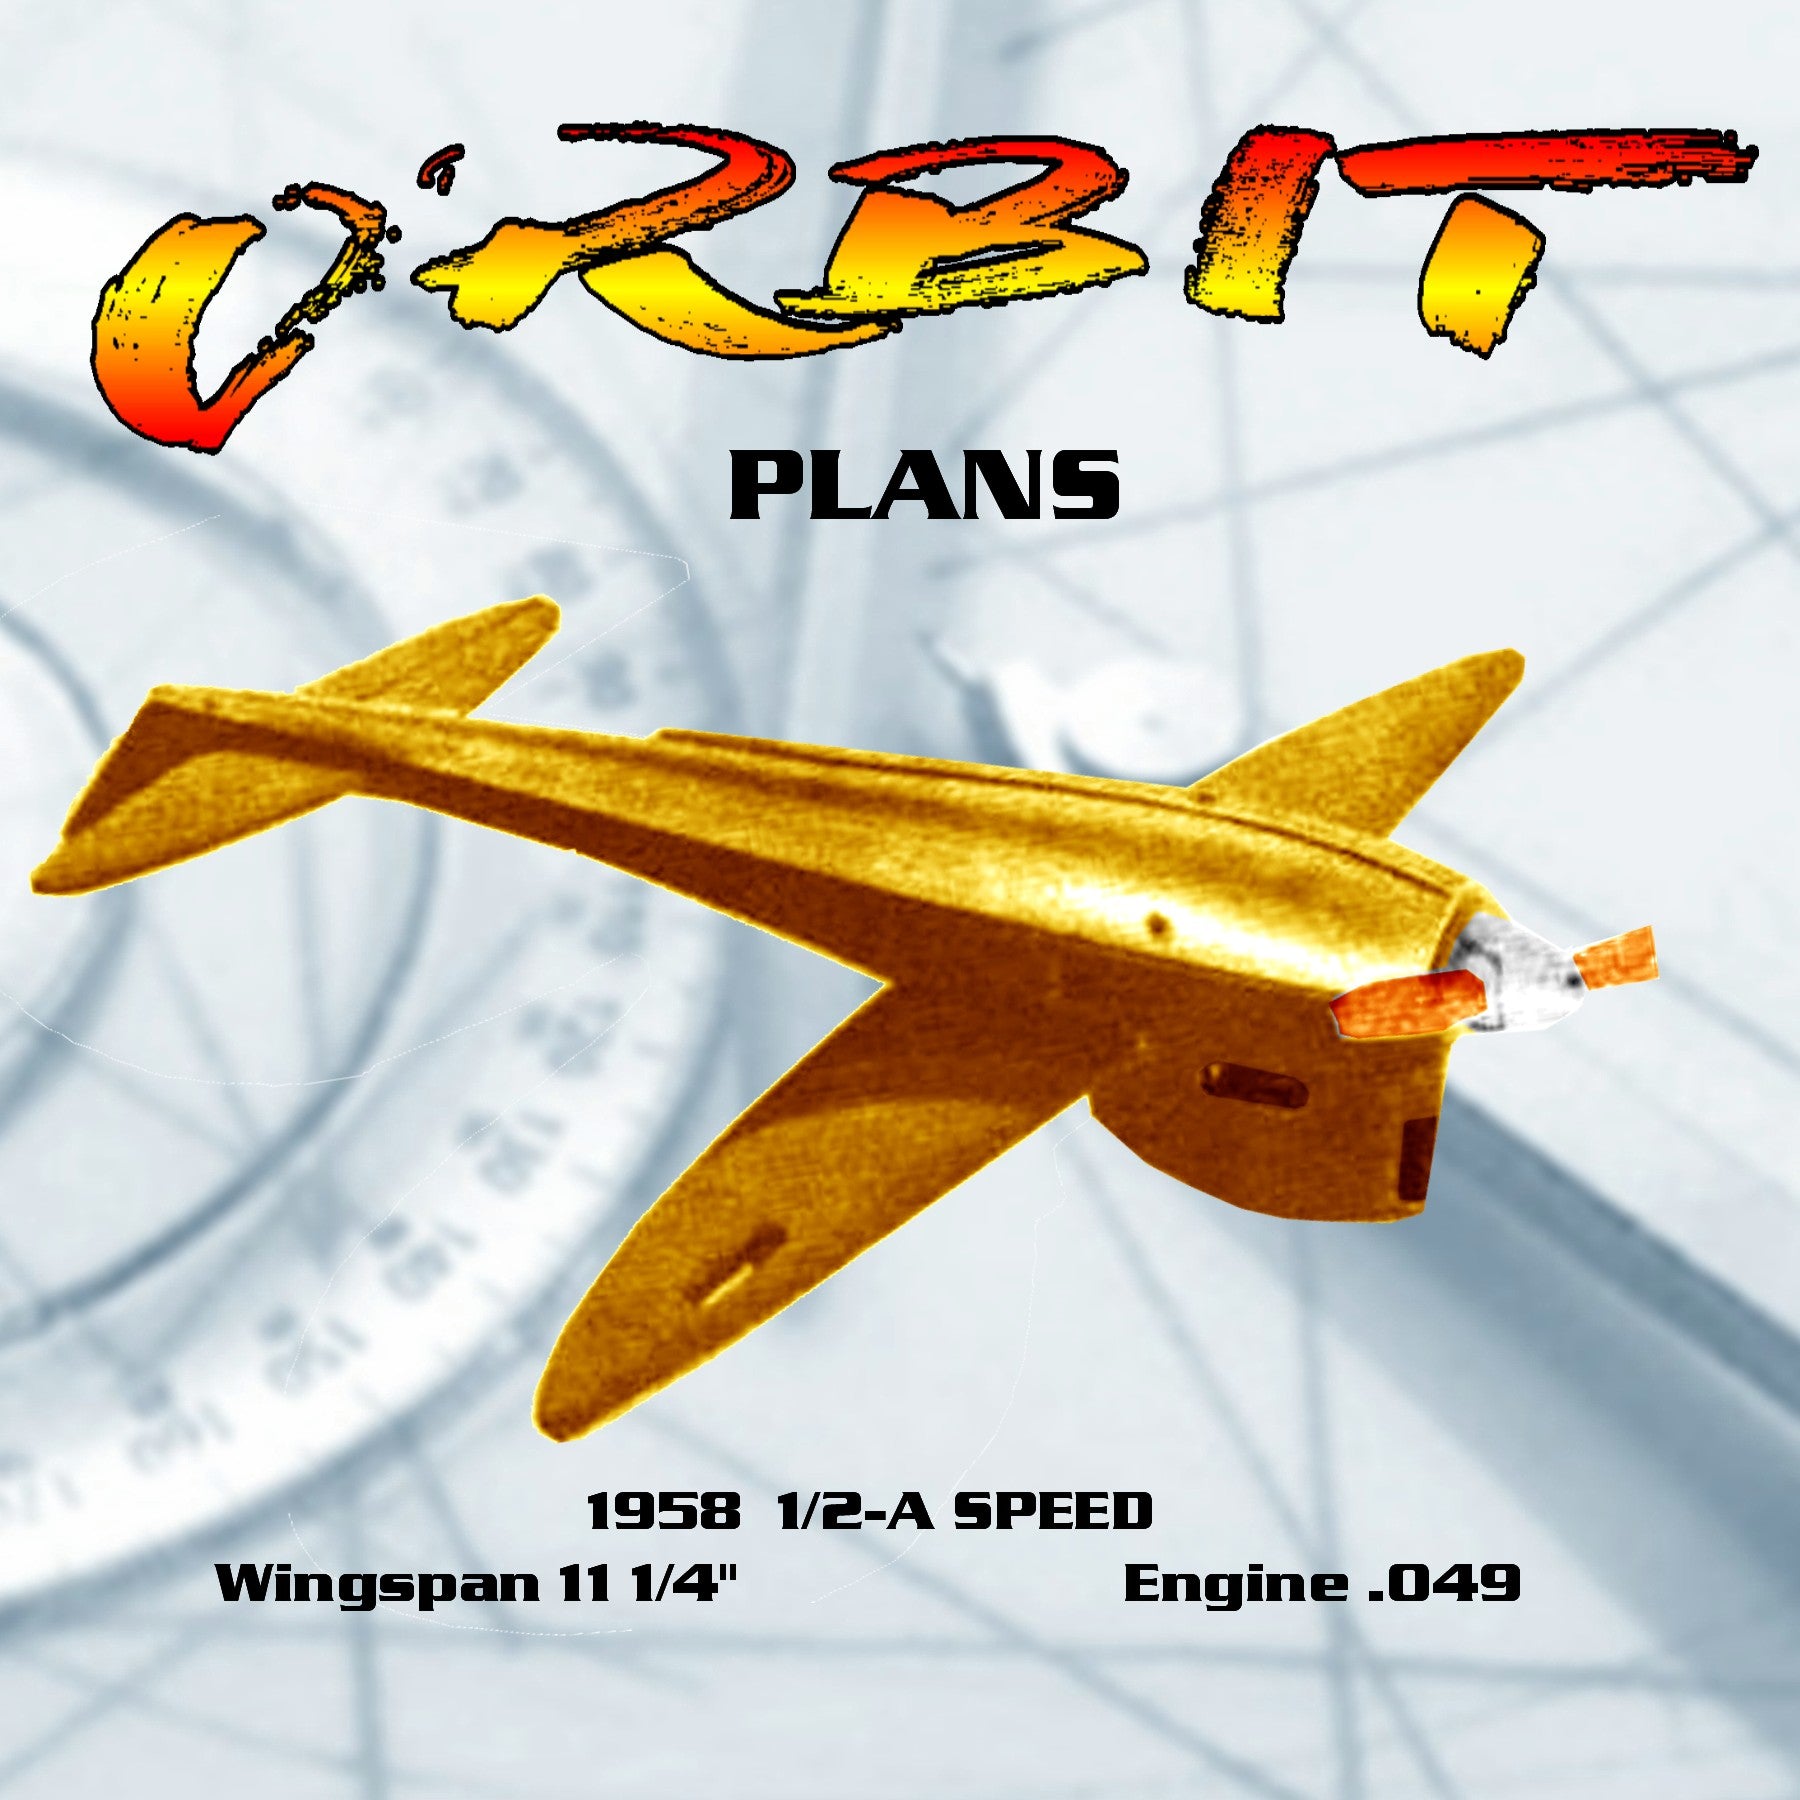 full size printed plan 1958 1/2 a control line speed the orbit wingspan  11 1/4" plans have all dimensions to build  1/2a,  a,  b. and c